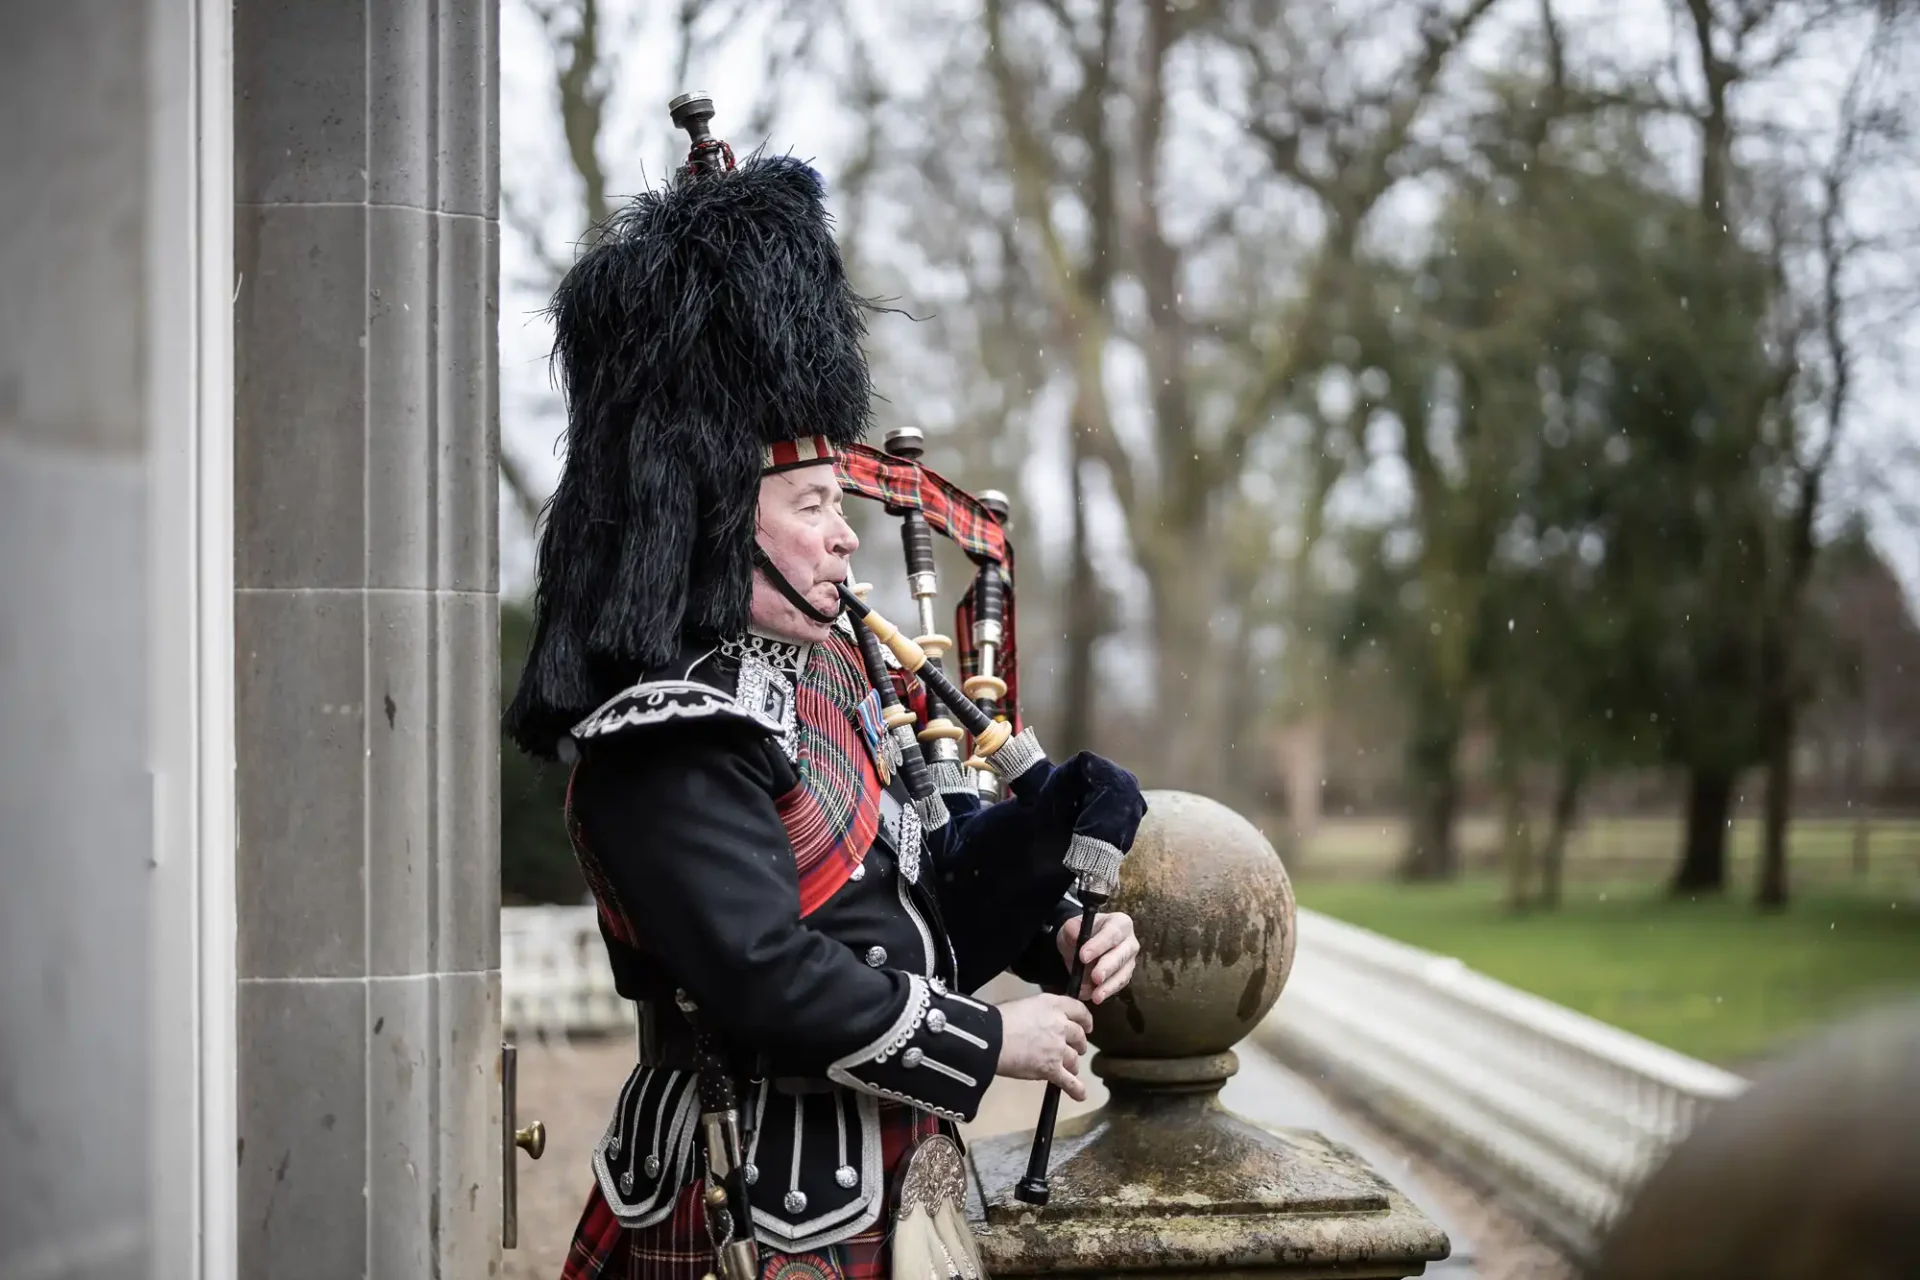 A bagpiper in traditional scottish attire playing outdoors near a stone building, wearing a black feathered hat and kilt.